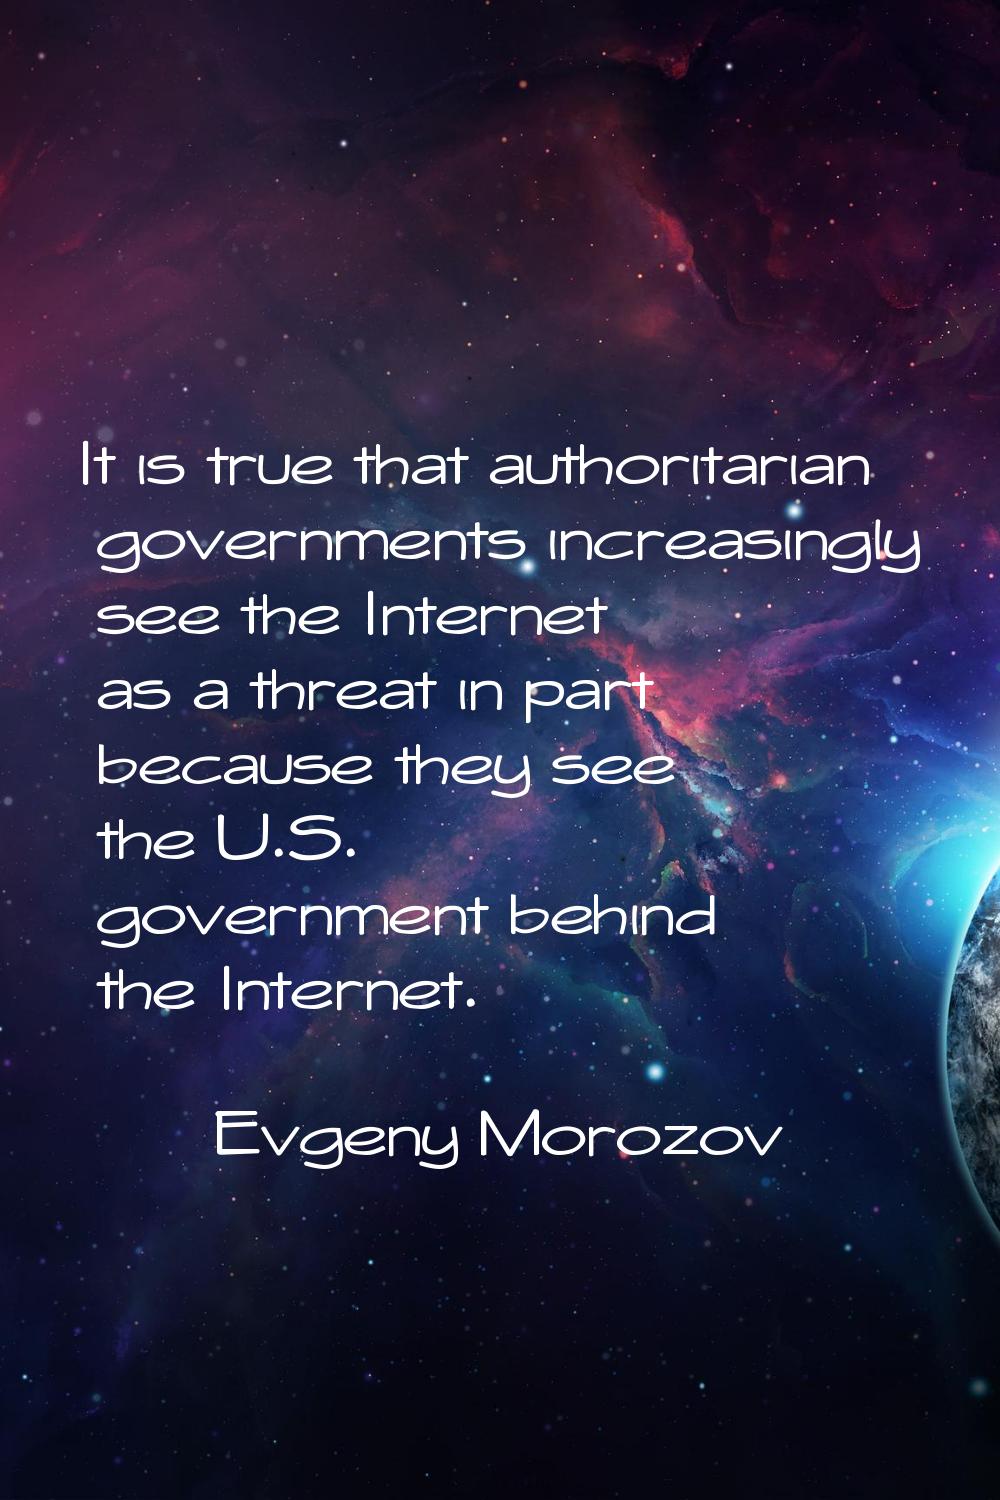 It is true that authoritarian governments increasingly see the Internet as a threat in part because